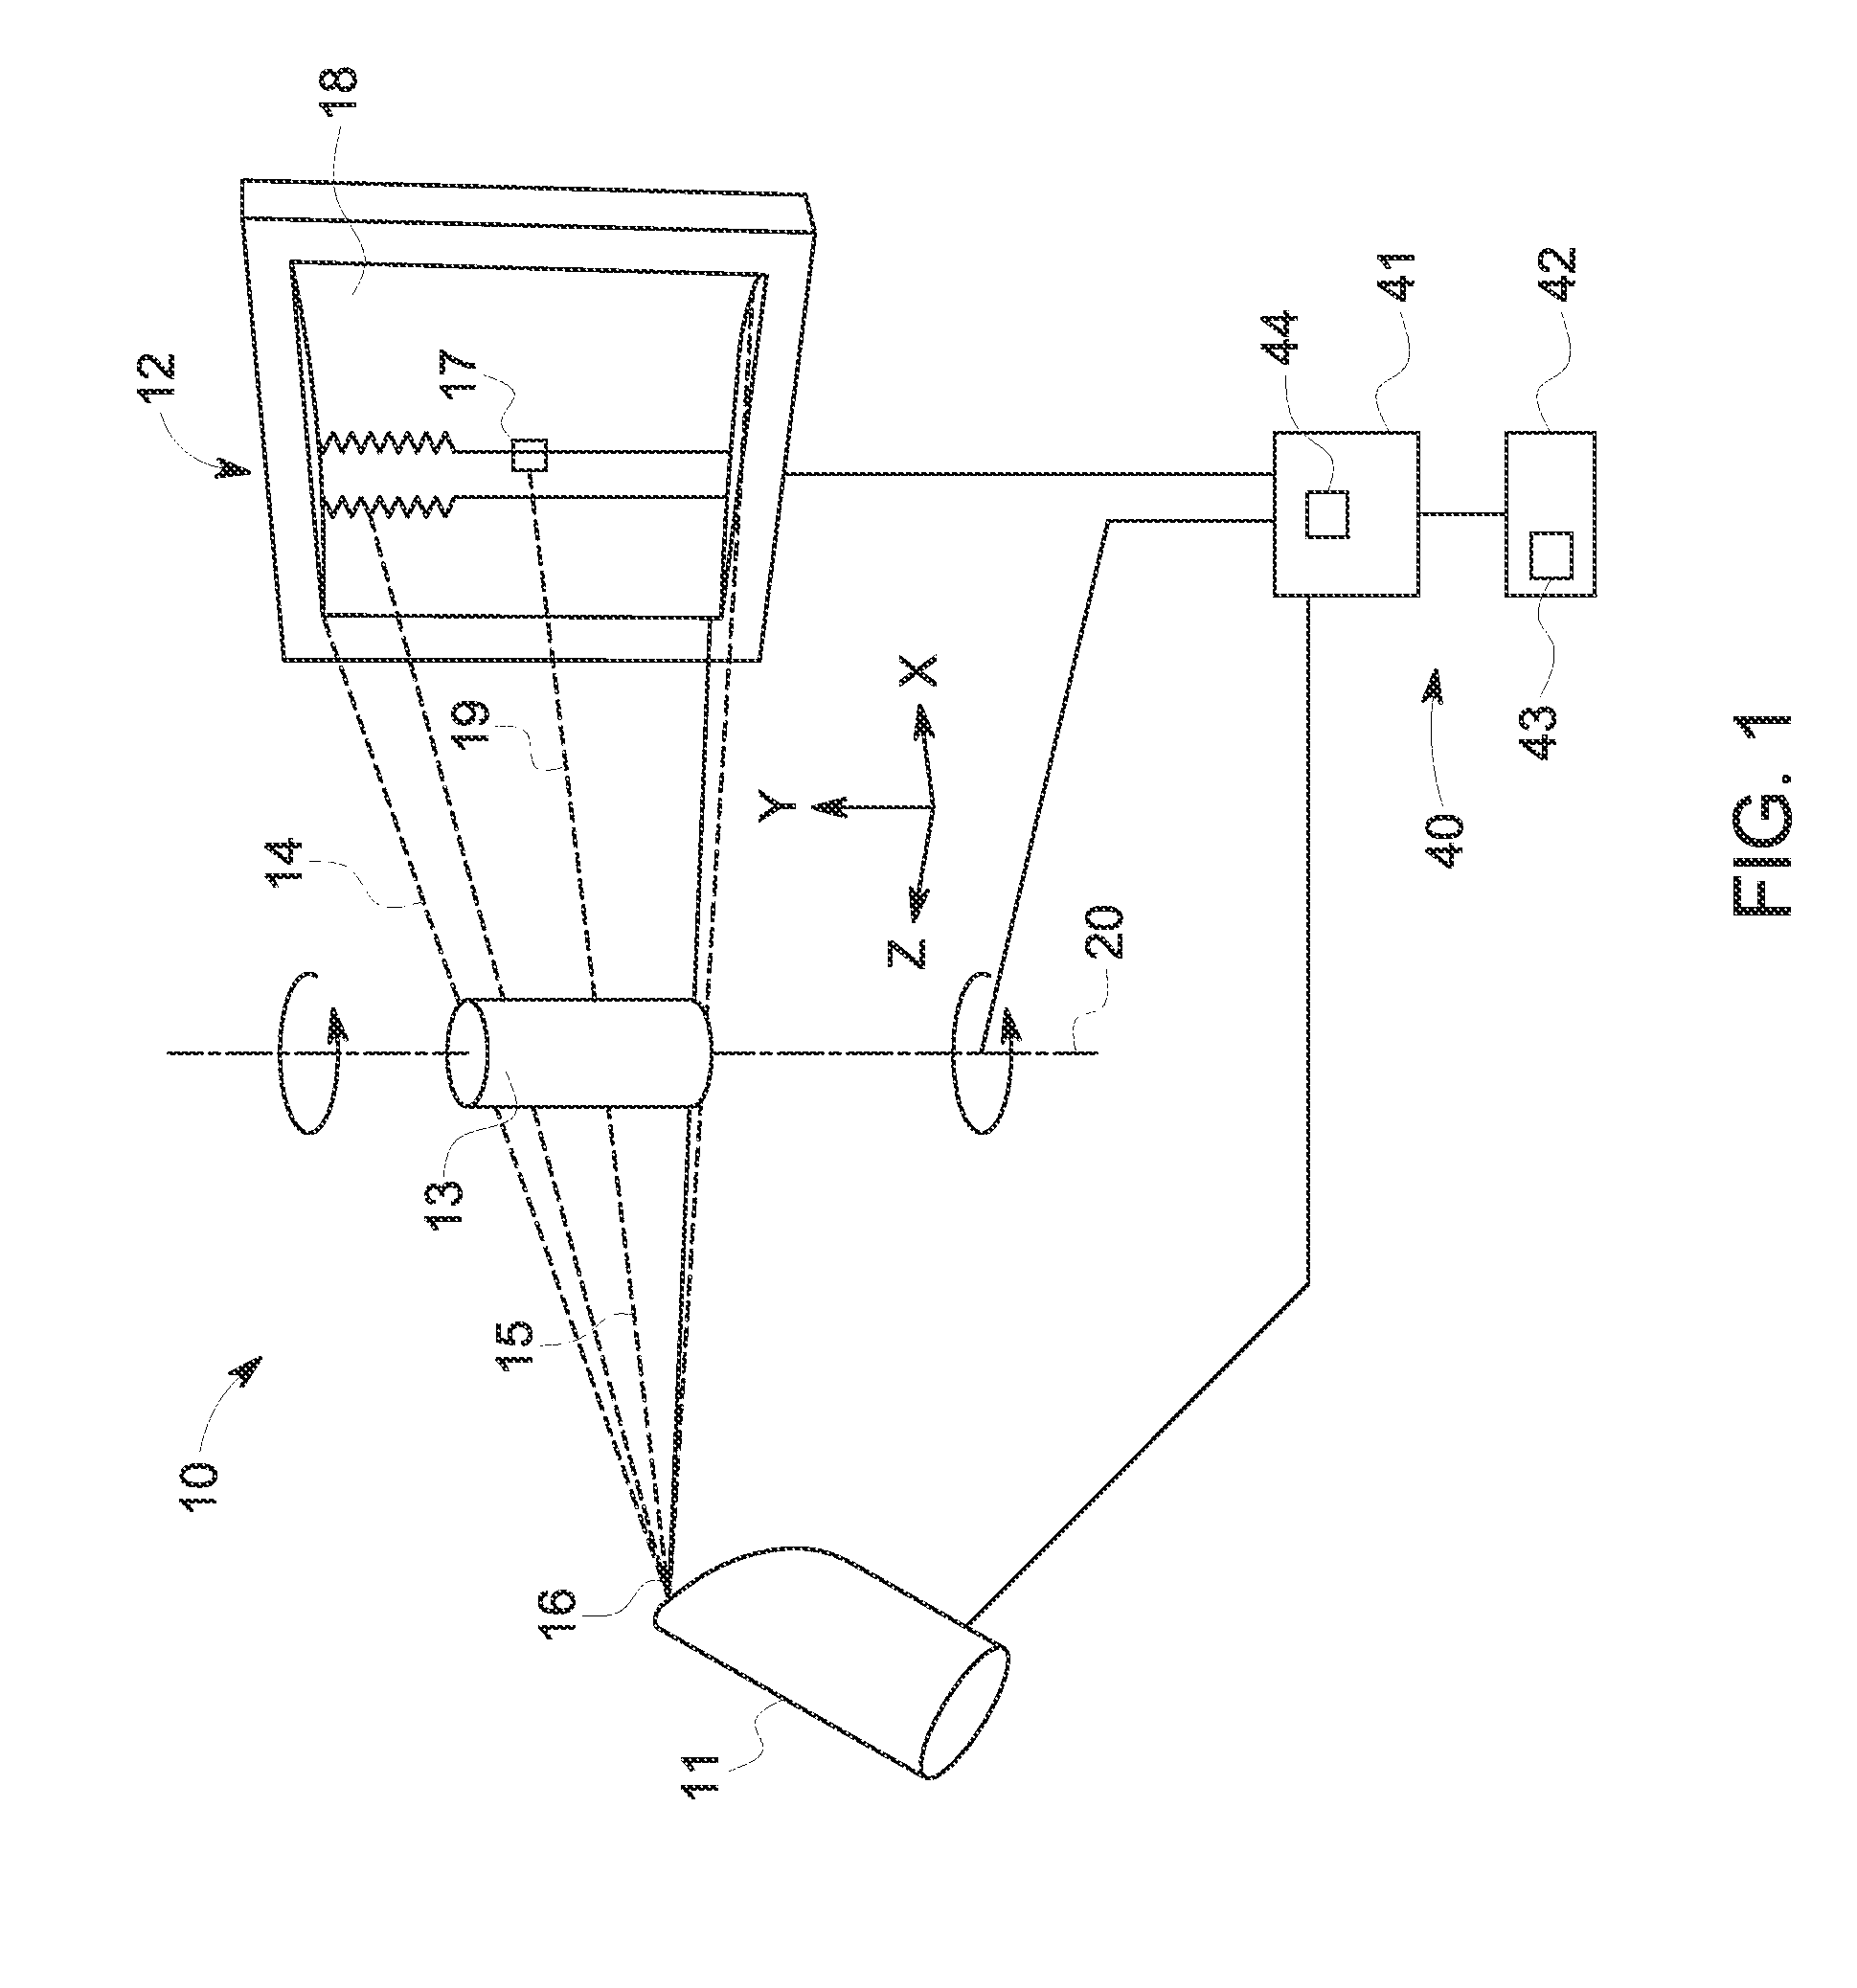 Method for determining geometric imaging properties of a flat panel detector, correspondingly adapted x-ray inspection system and calibration phantom